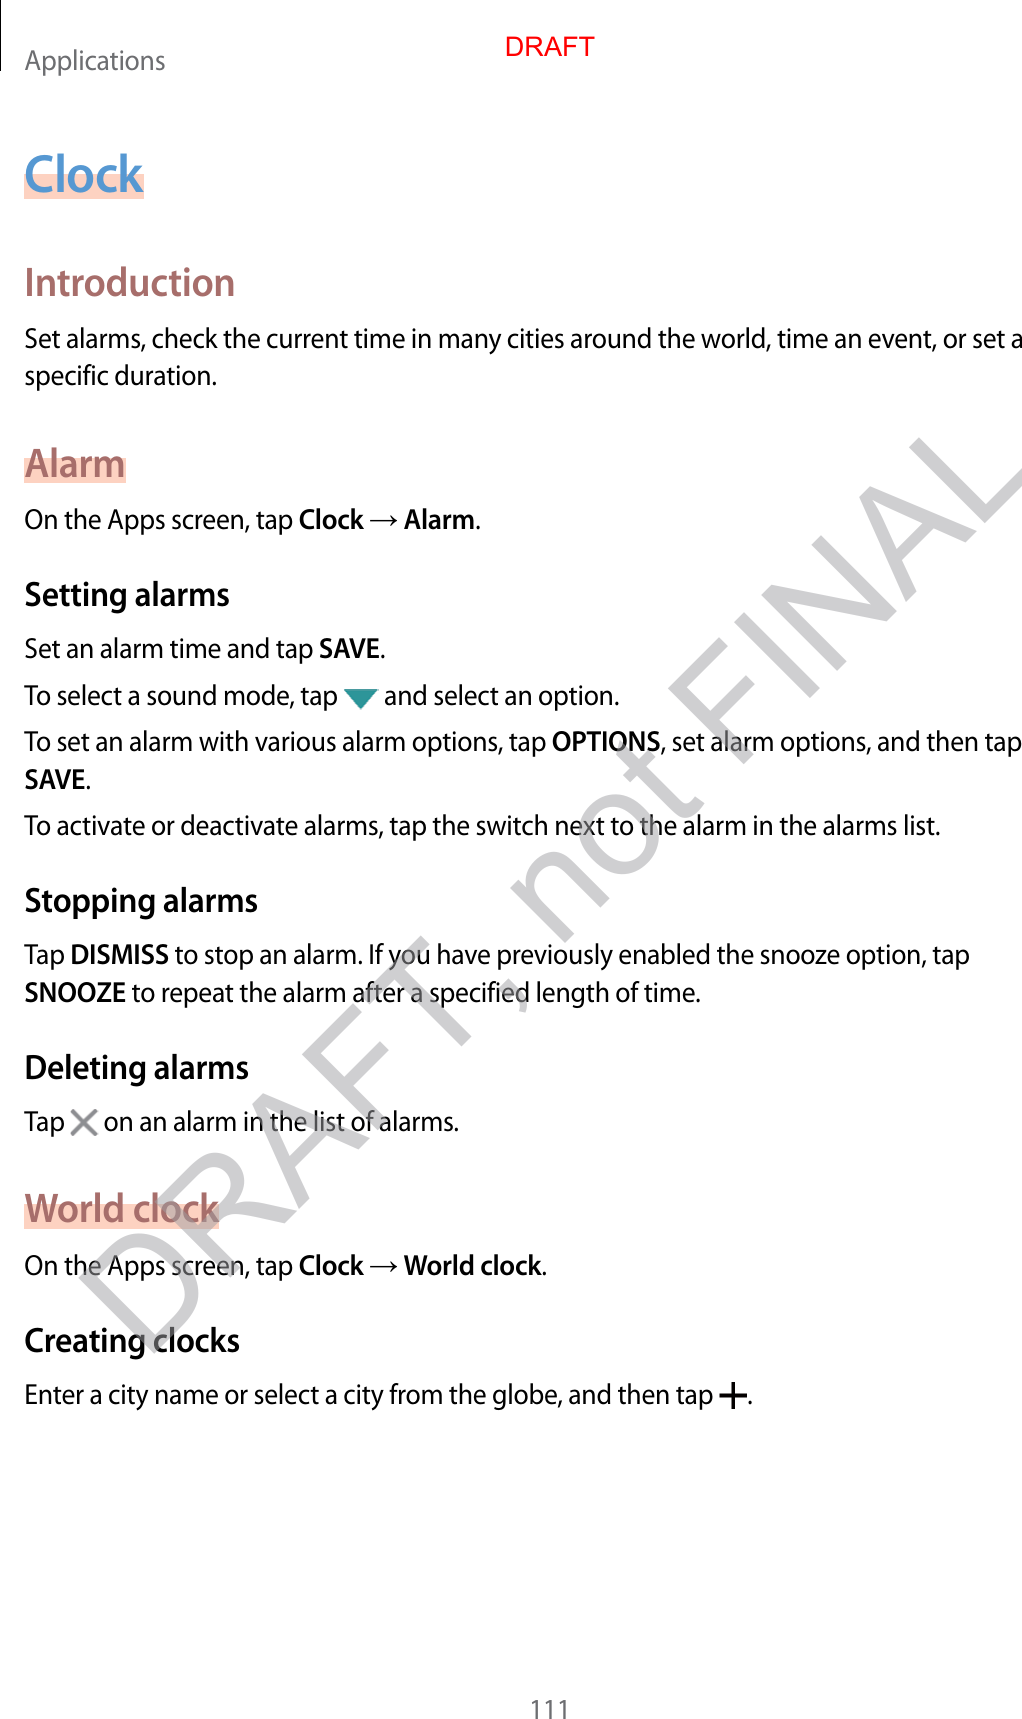 Applications111ClockIntroductionSet alarms, check the current time in many cities around the world, time an event, or set a specific duration.AlarmOn the Apps screen, tap Clock  Alarm.Setting alarmsSet an alarm time and tap SAVE.To select a sound mode, tap   and select an option.To set an alarm with various alarm options, tap OPTIONS, set alarm options, and then tap SAVE.To activate or deactivate alarms, tap the switch next to the alarm in the alarms list.Stopping alarmsTap DISMISS to stop an alarm. If you have previously enabled the snooze option, tap SNOOZE to repeat the alarm after a specified length of time.Deleting alarmsTap   on an alarm in the list of alarms.World clockOn the Apps screen, tap Clock  World clock.Creating clocksEnter a city name or select a city from the globe, and then tap  .DRAFTDRAFT, not FINAL